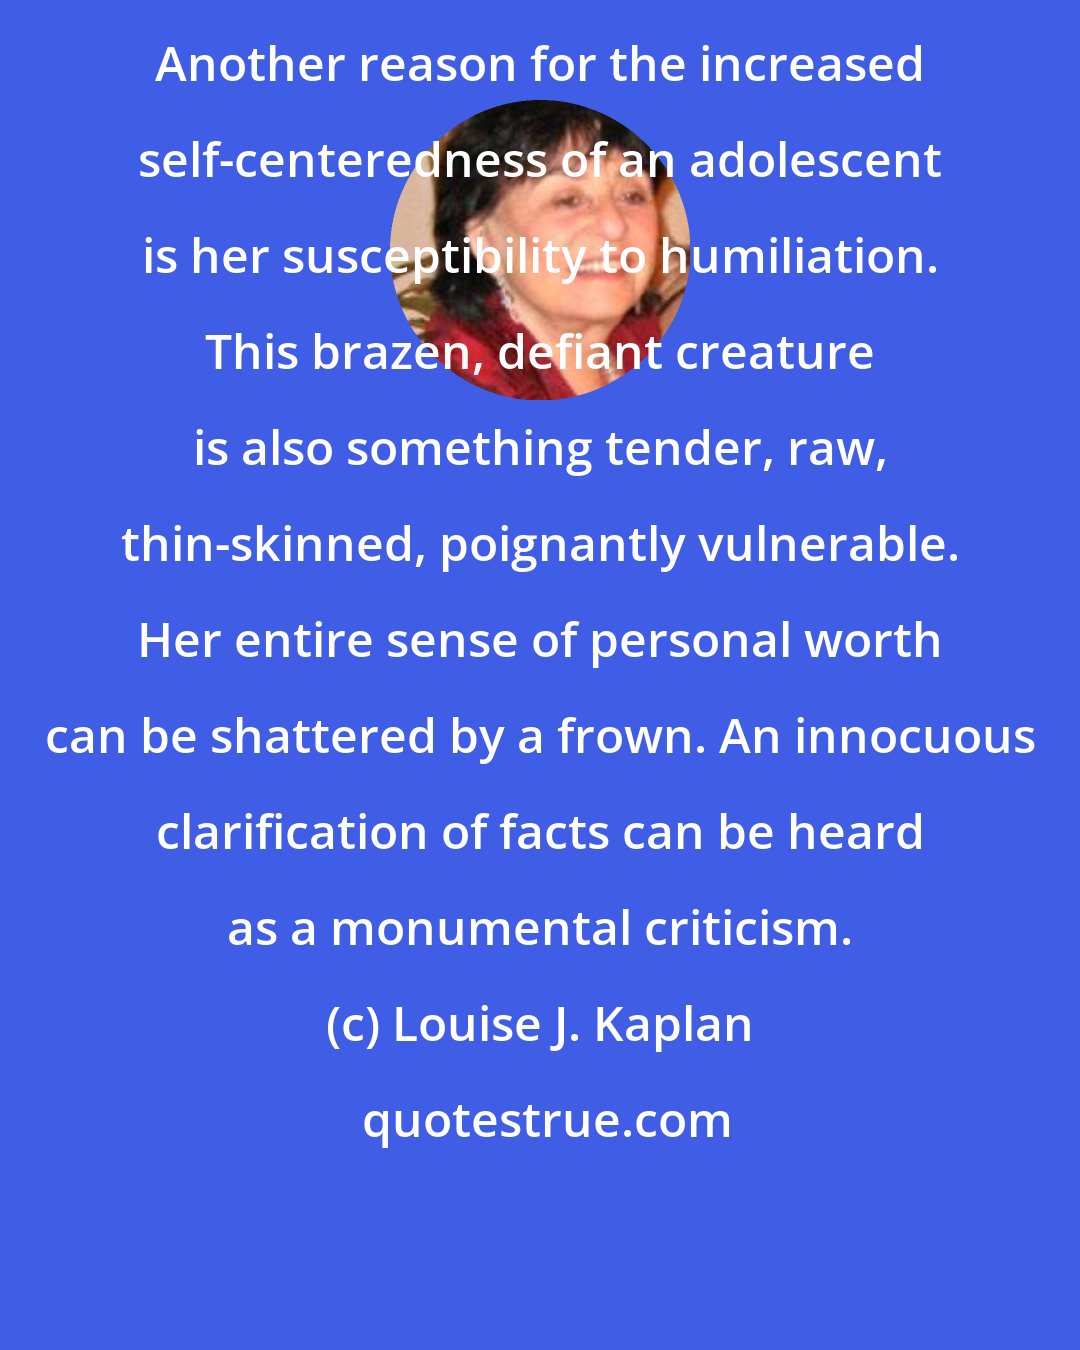 Louise J. Kaplan: Another reason for the increased self-centeredness of an adolescent is her susceptibility to humiliation. This brazen, defiant creature is also something tender, raw, thin-skinned, poignantly vulnerable. Her entire sense of personal worth can be shattered by a frown. An innocuous clarification of facts can be heard as a monumental criticism.